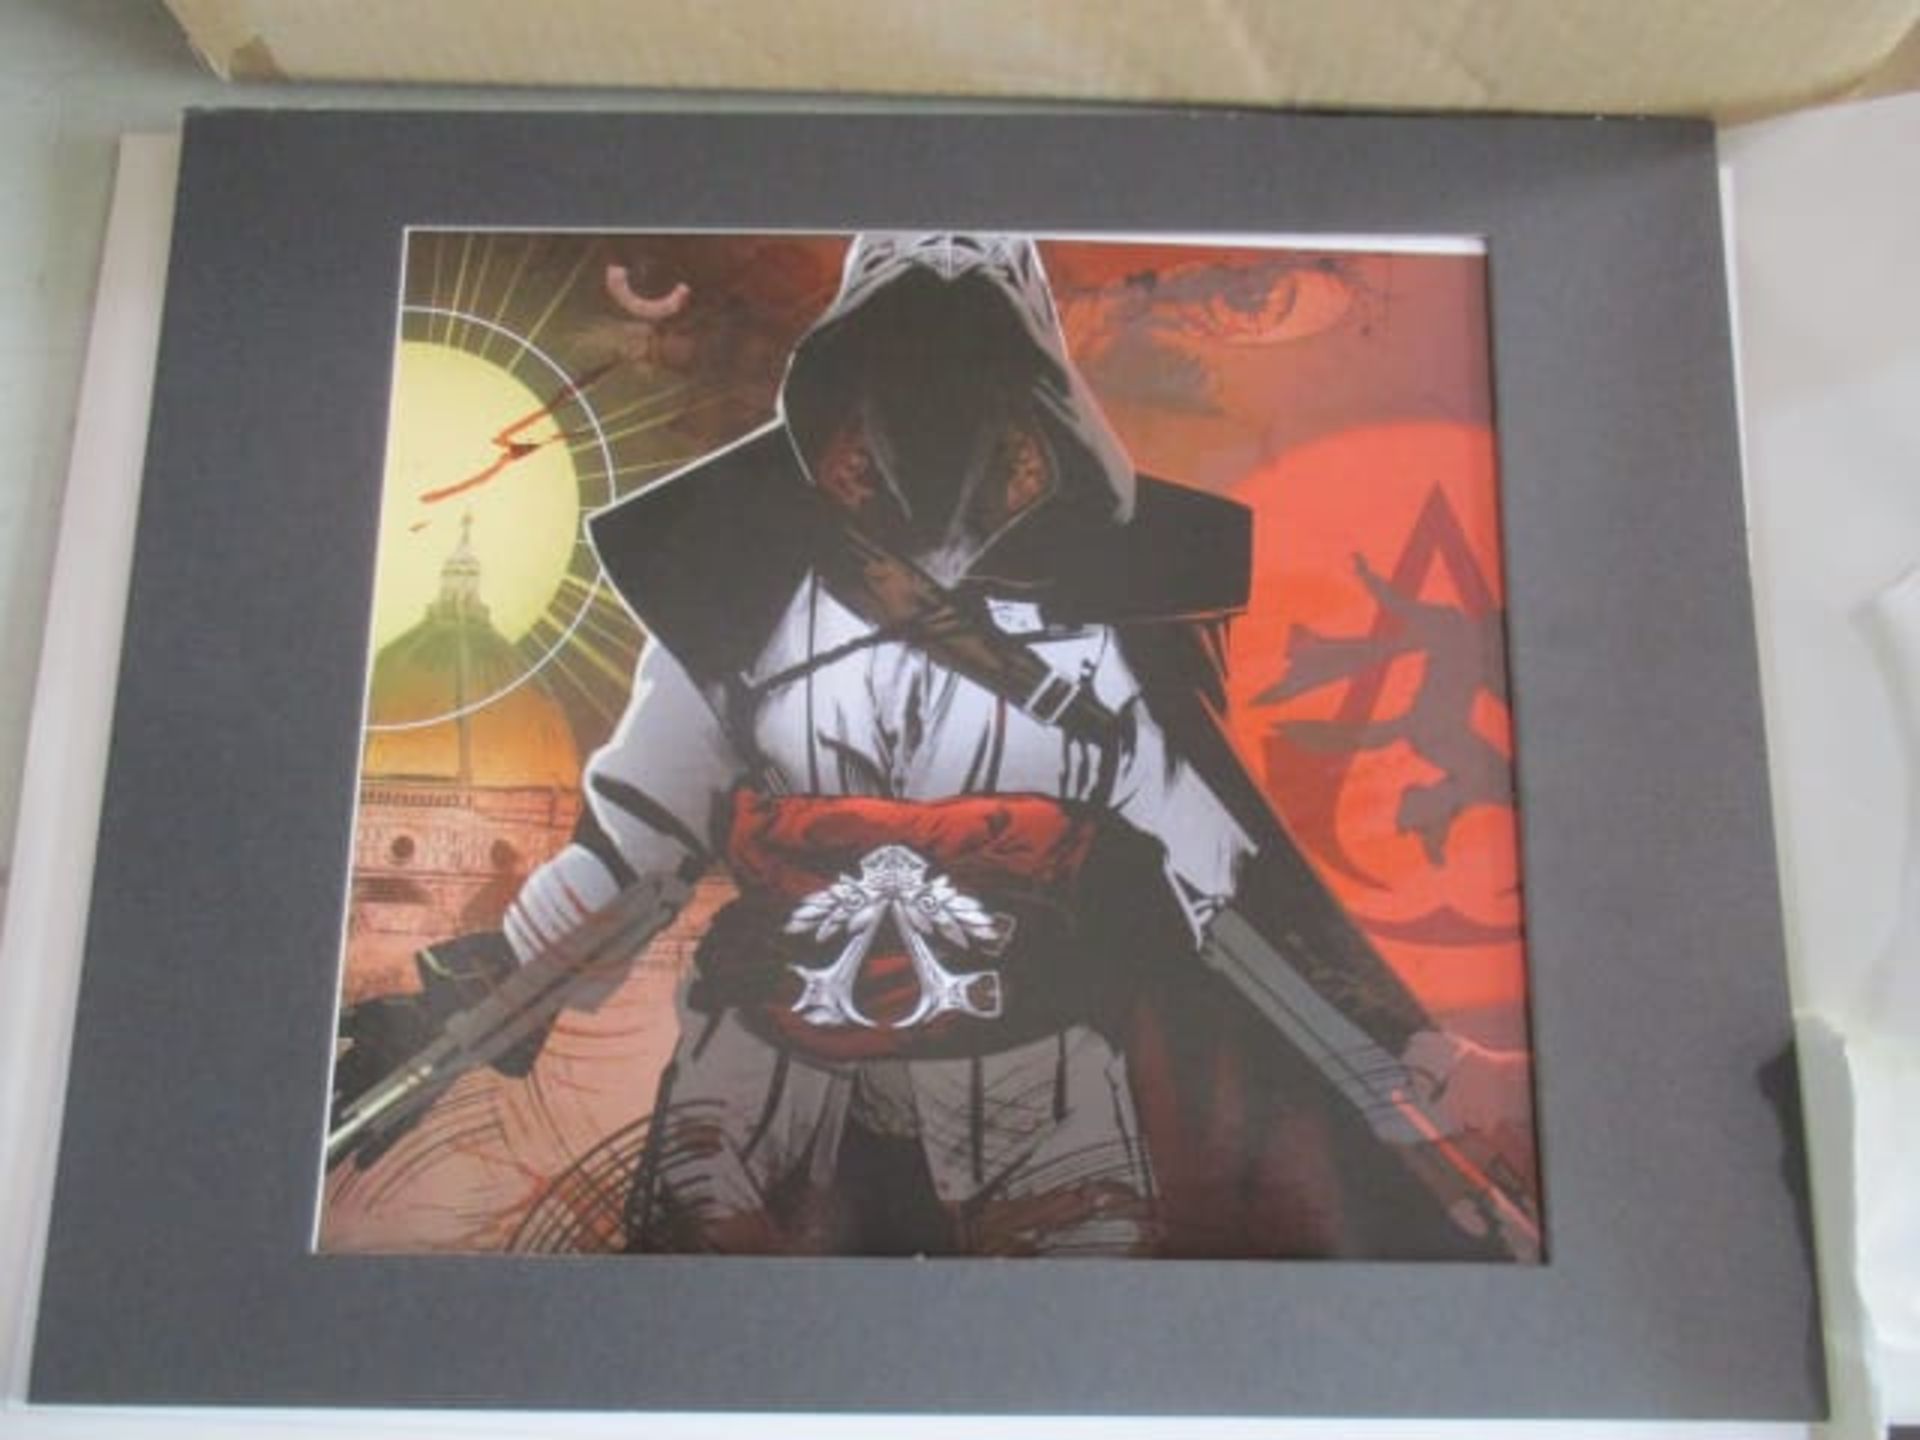 100 x Assasins Creed Lithographic Prints - Image 3 of 4